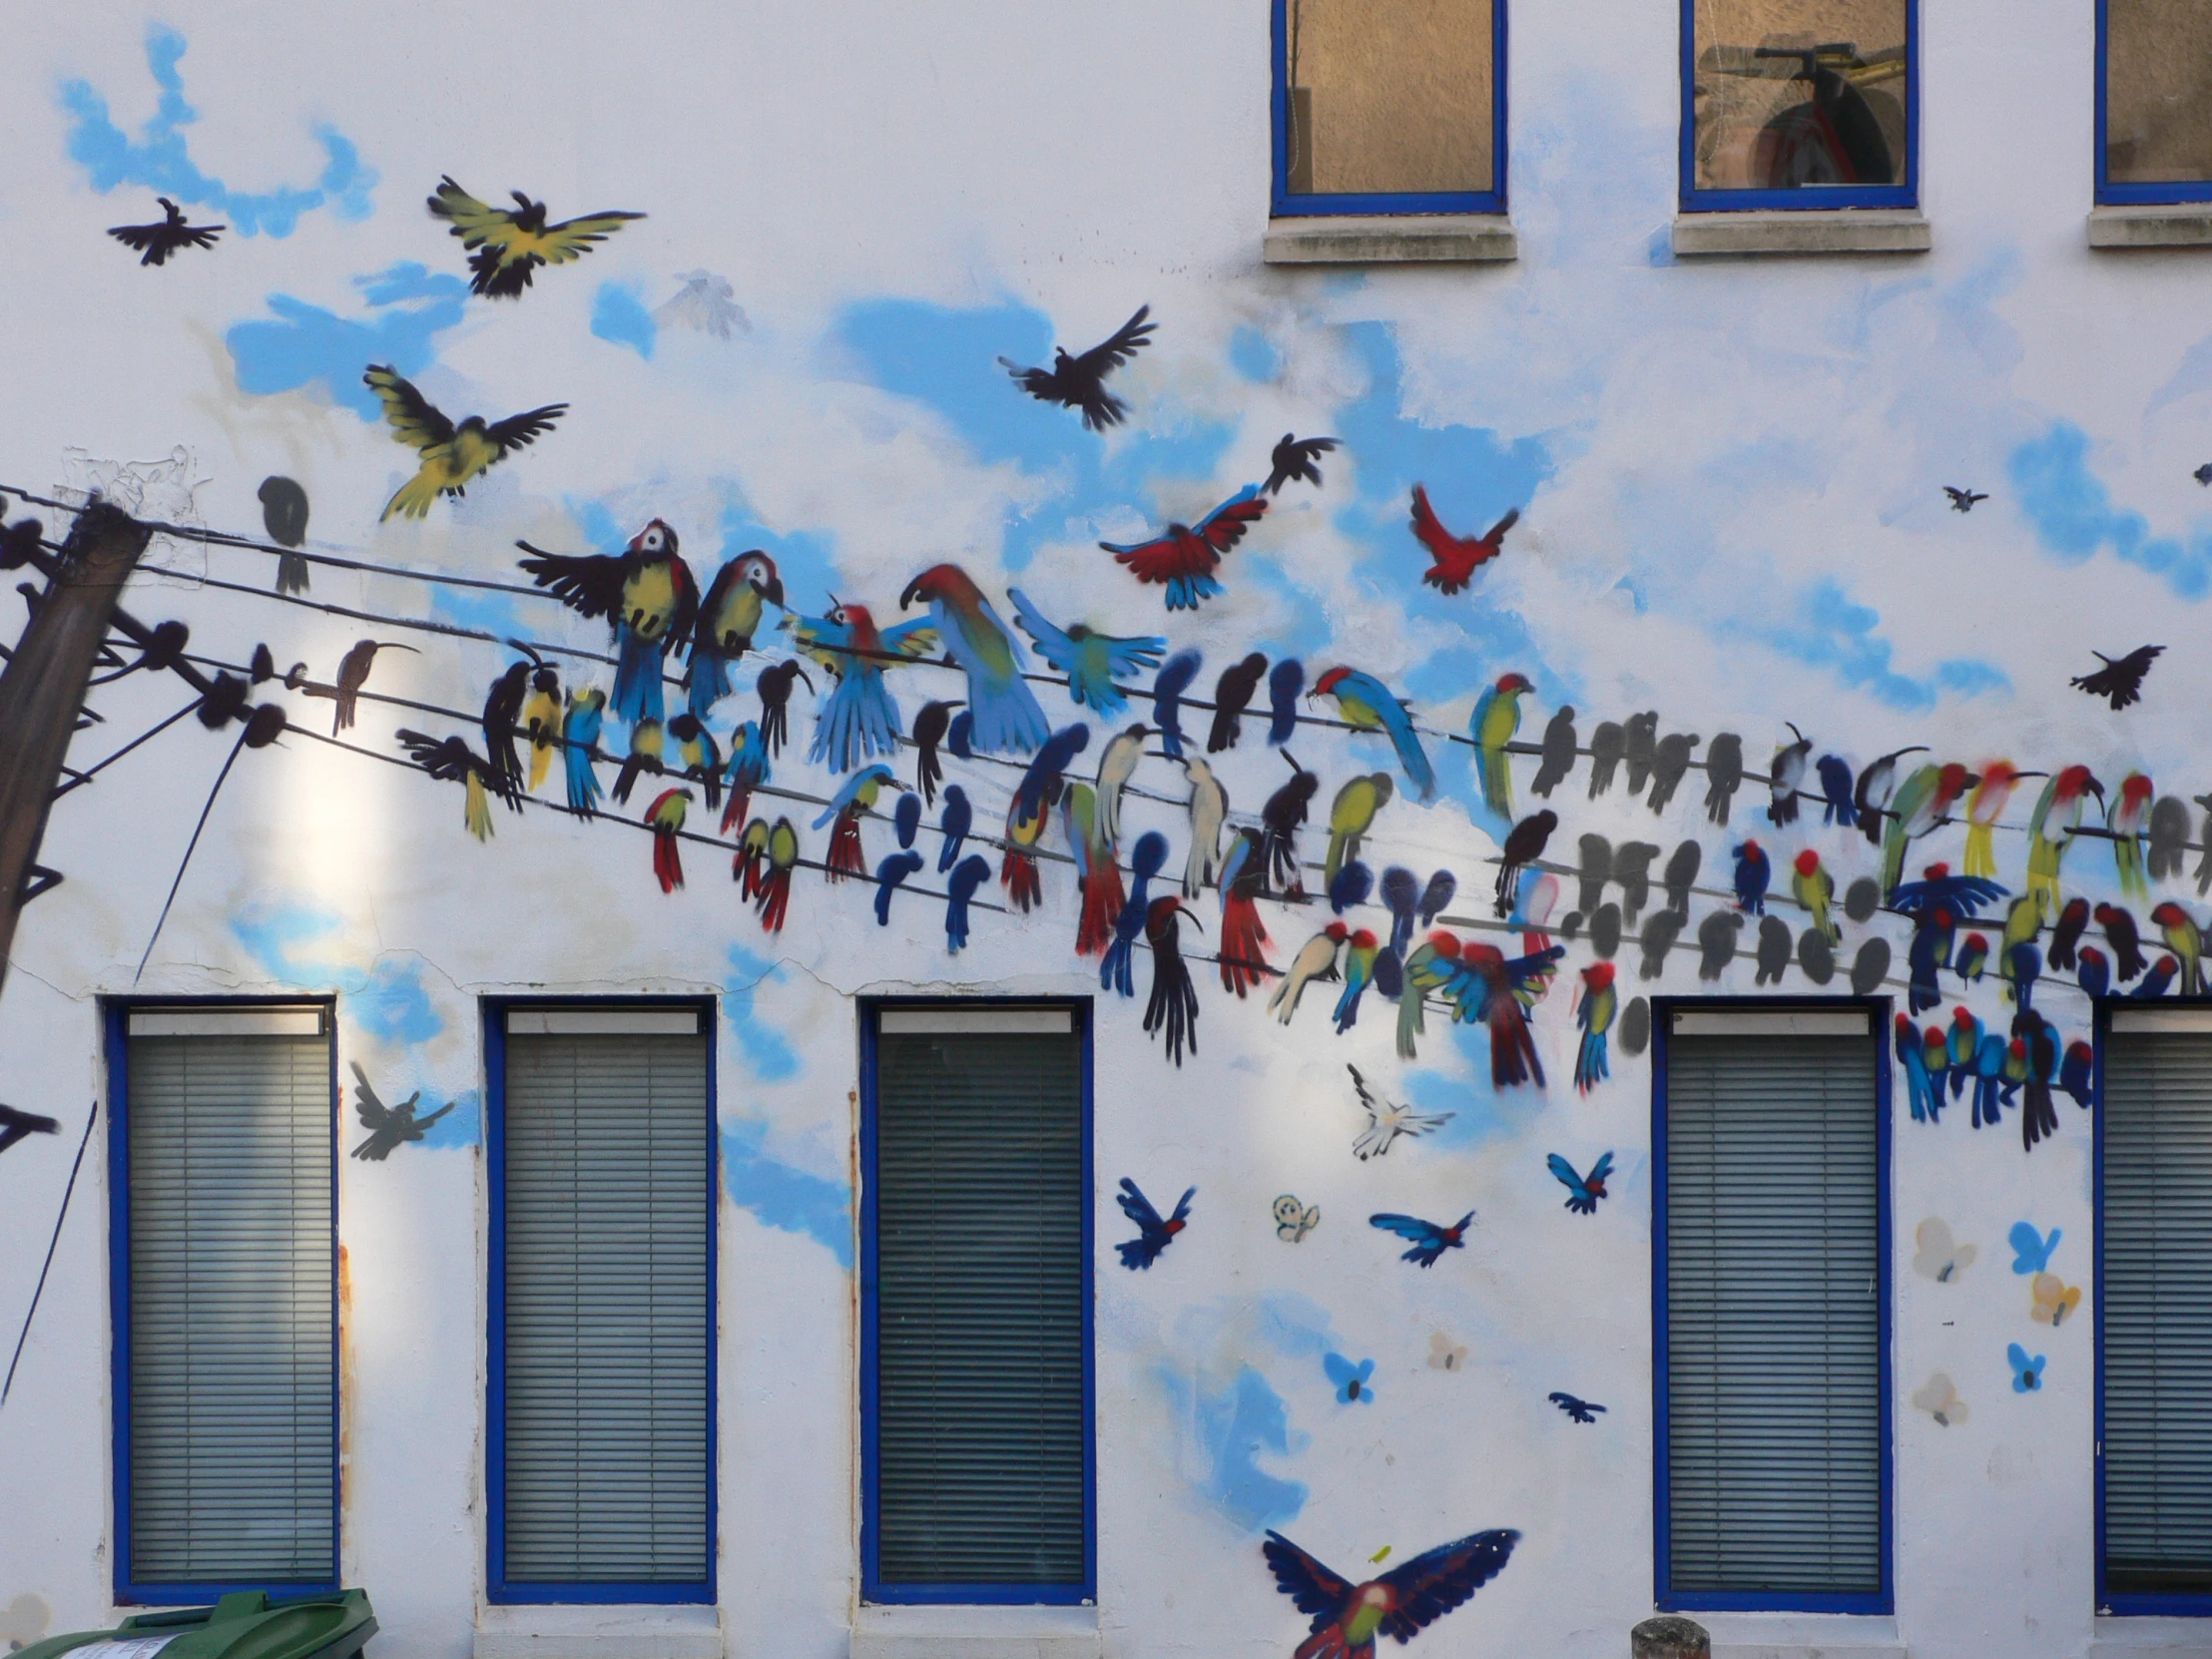 birds on clothes line painted on the side of a building